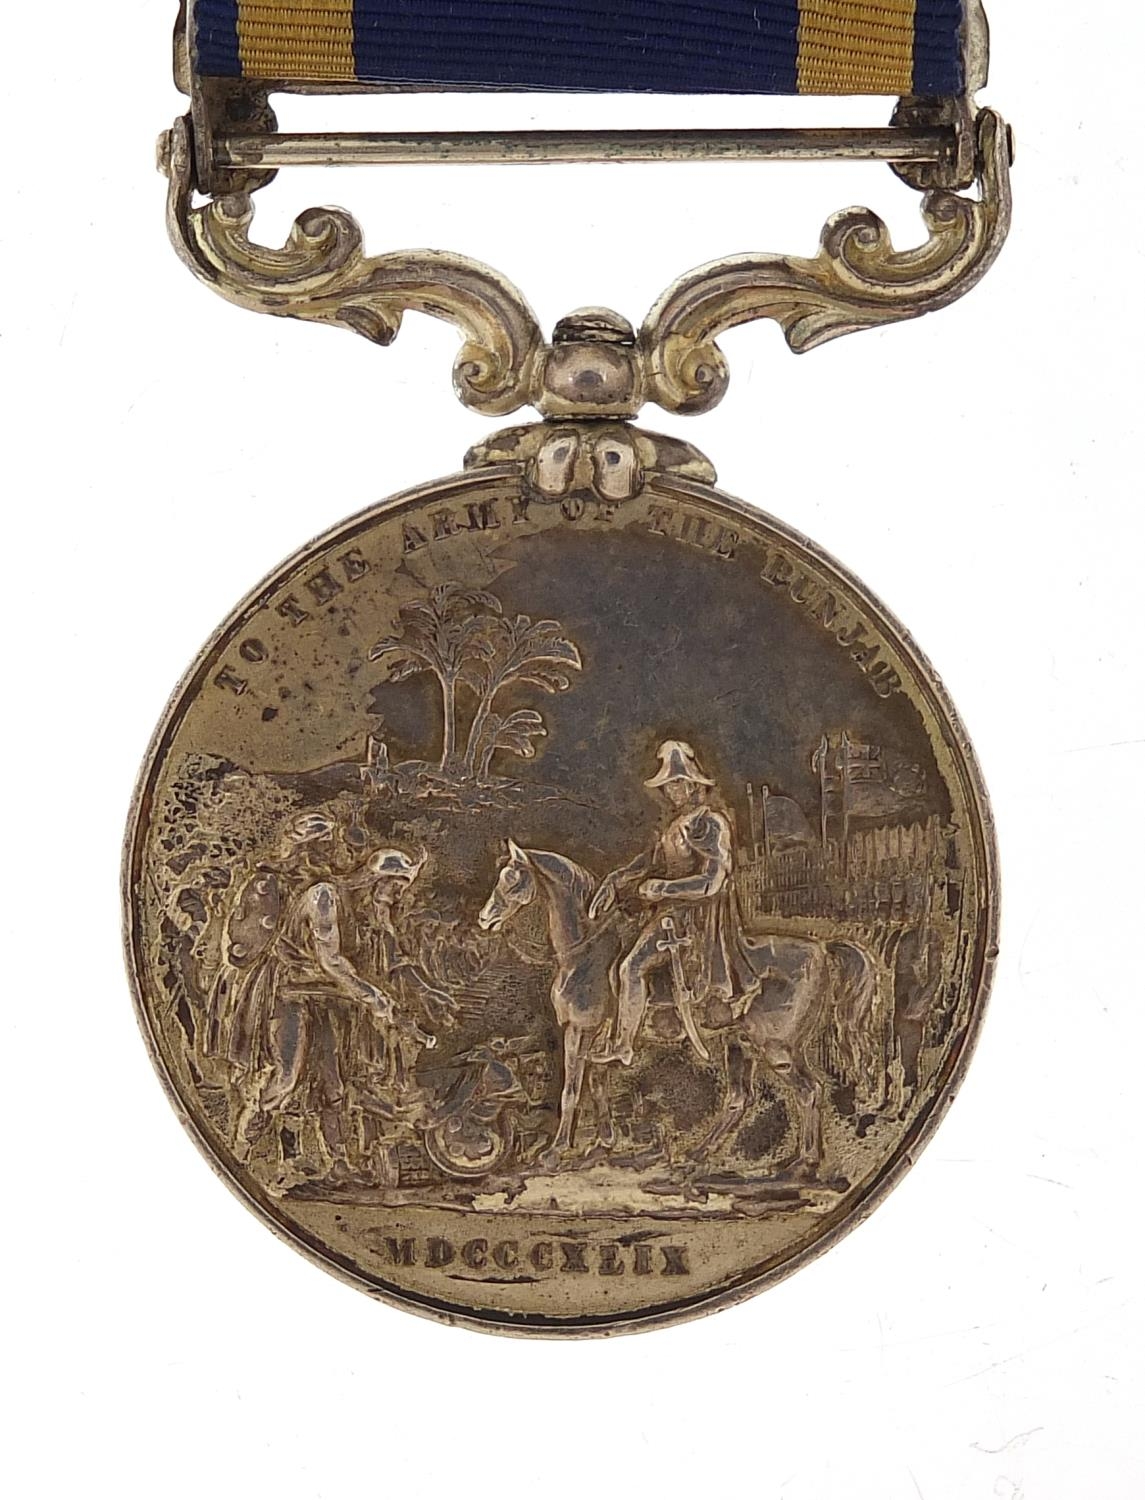 Victorian British military Punjab medal with Chilianwala and Goojerat bars awarded to THOS. - Image 3 of 3